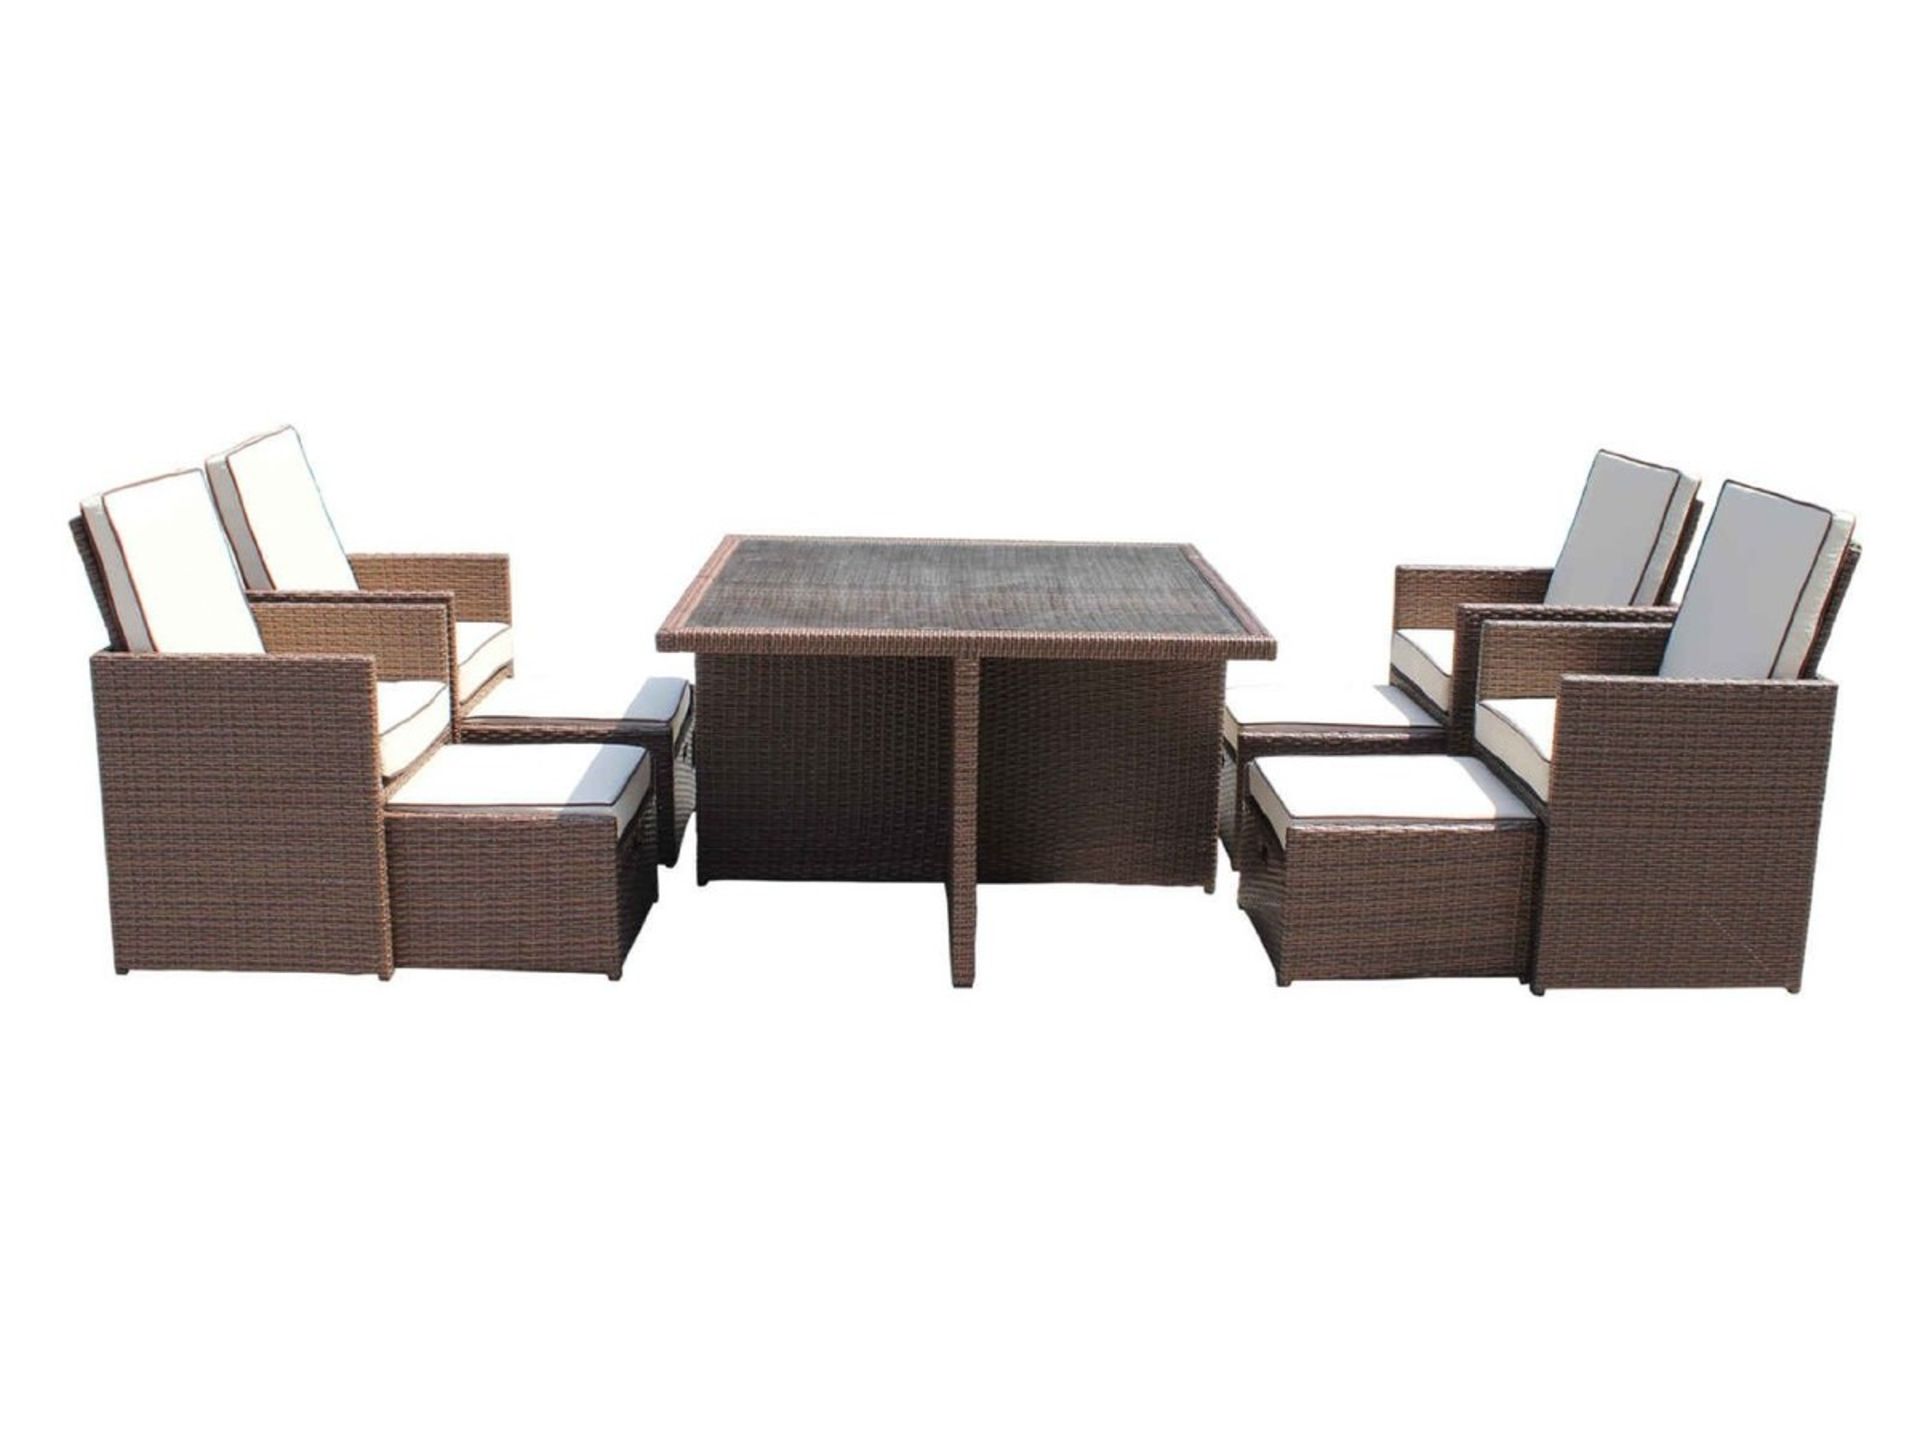 The Barcelona 9 Piece Rattan Garden Cube Set in chocolate brown mix rattan. - Image 3 of 3